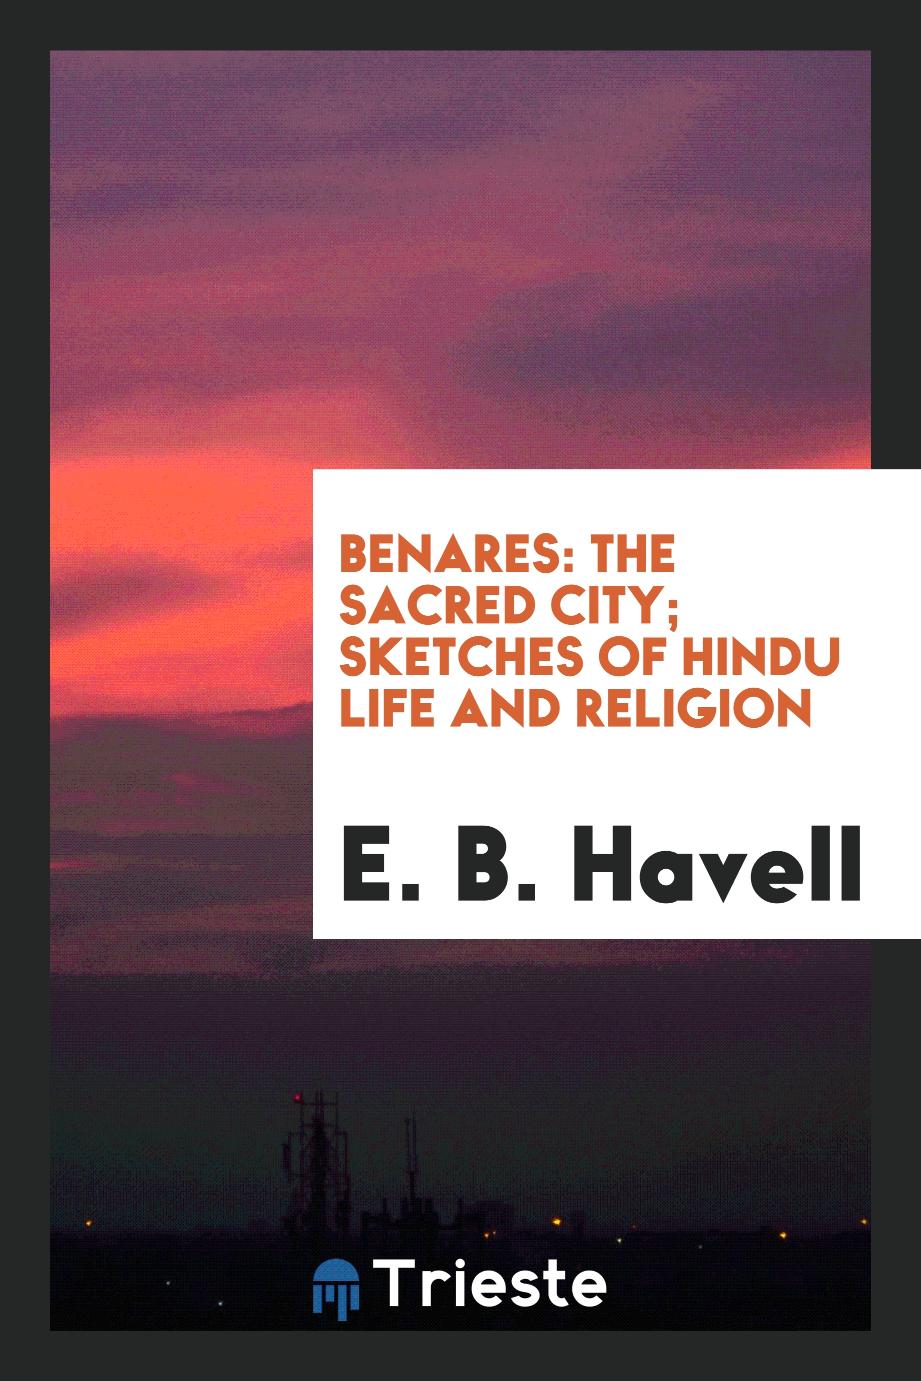 Benares: the sacred city; sketches of Hindu life and religion